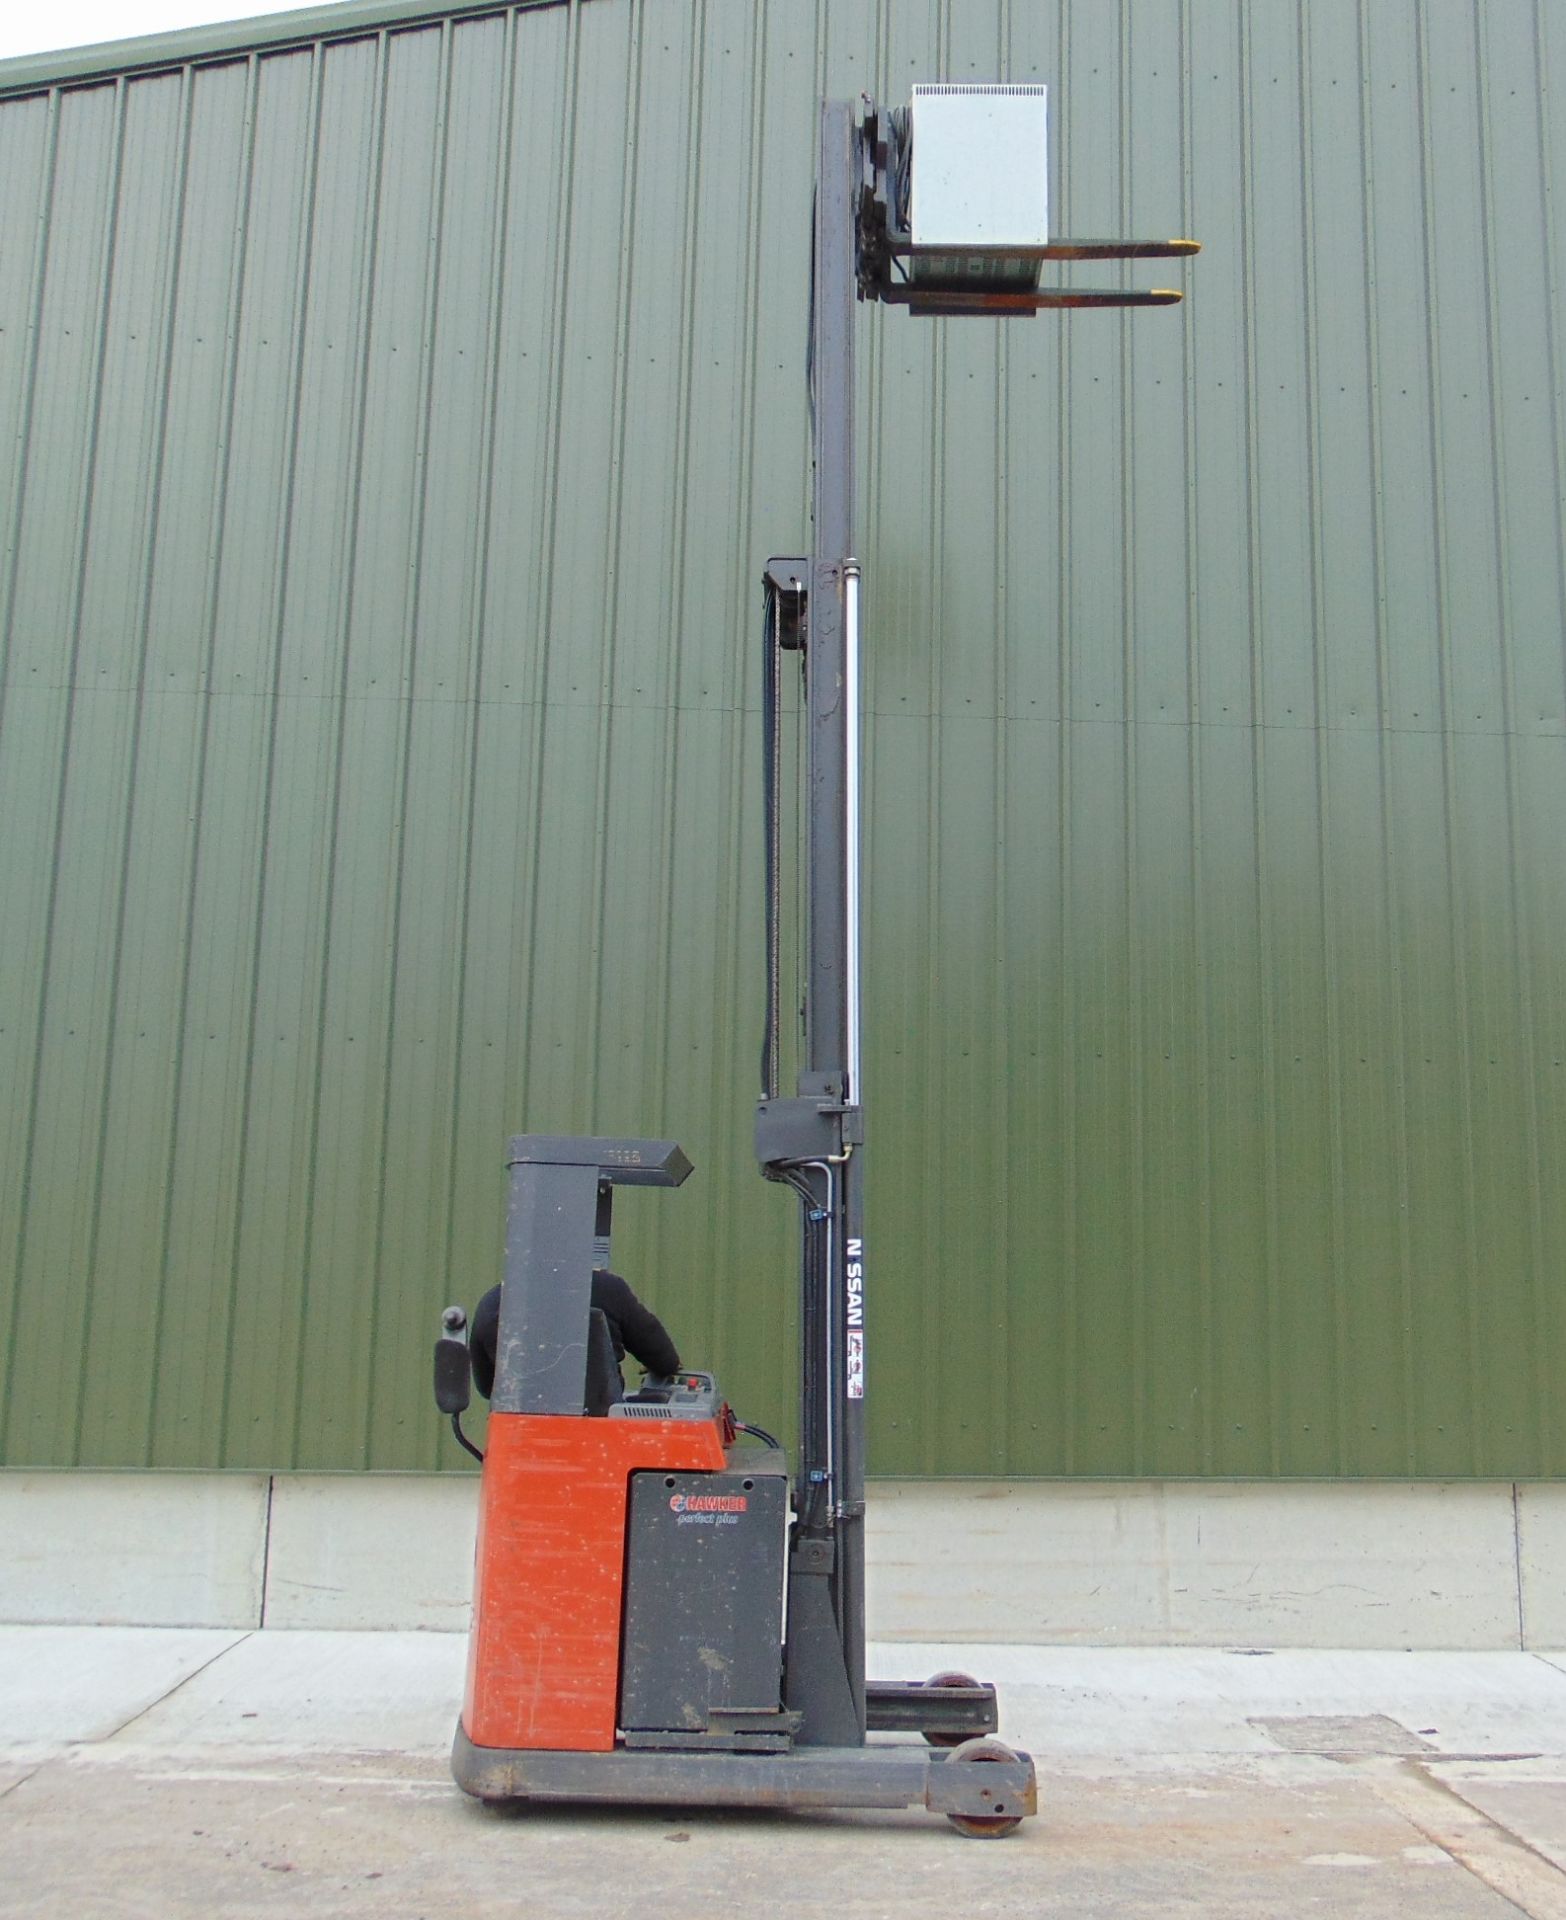 Nissan UNS-200 Electric Reach Fork Lift w/ Battery Charger Unit 2283 hrs - Image 15 of 31